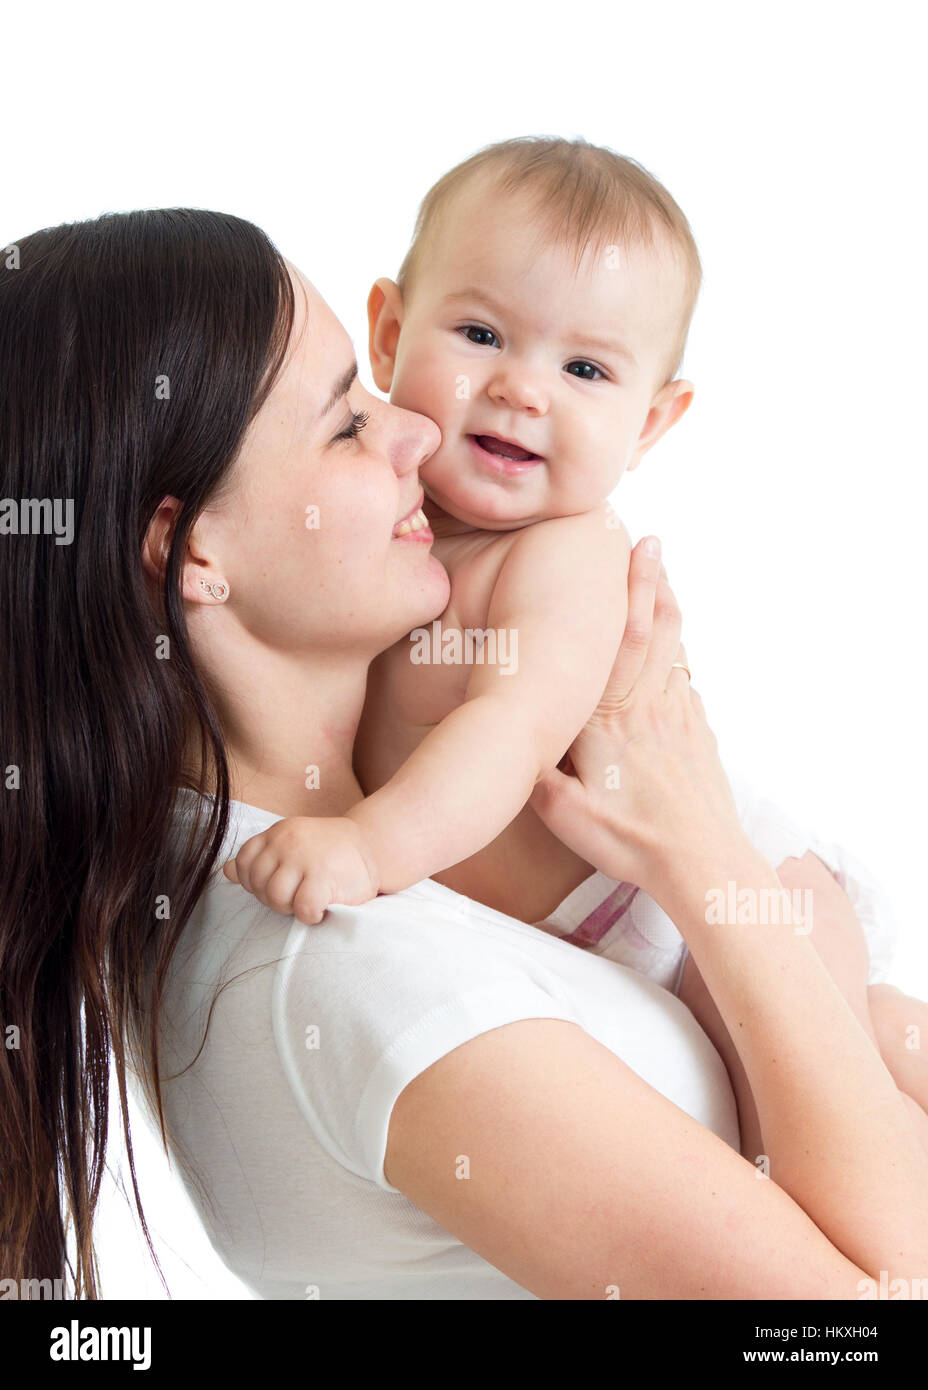 Happy family. A young mother with baby kissing and hugging. Stock Photo